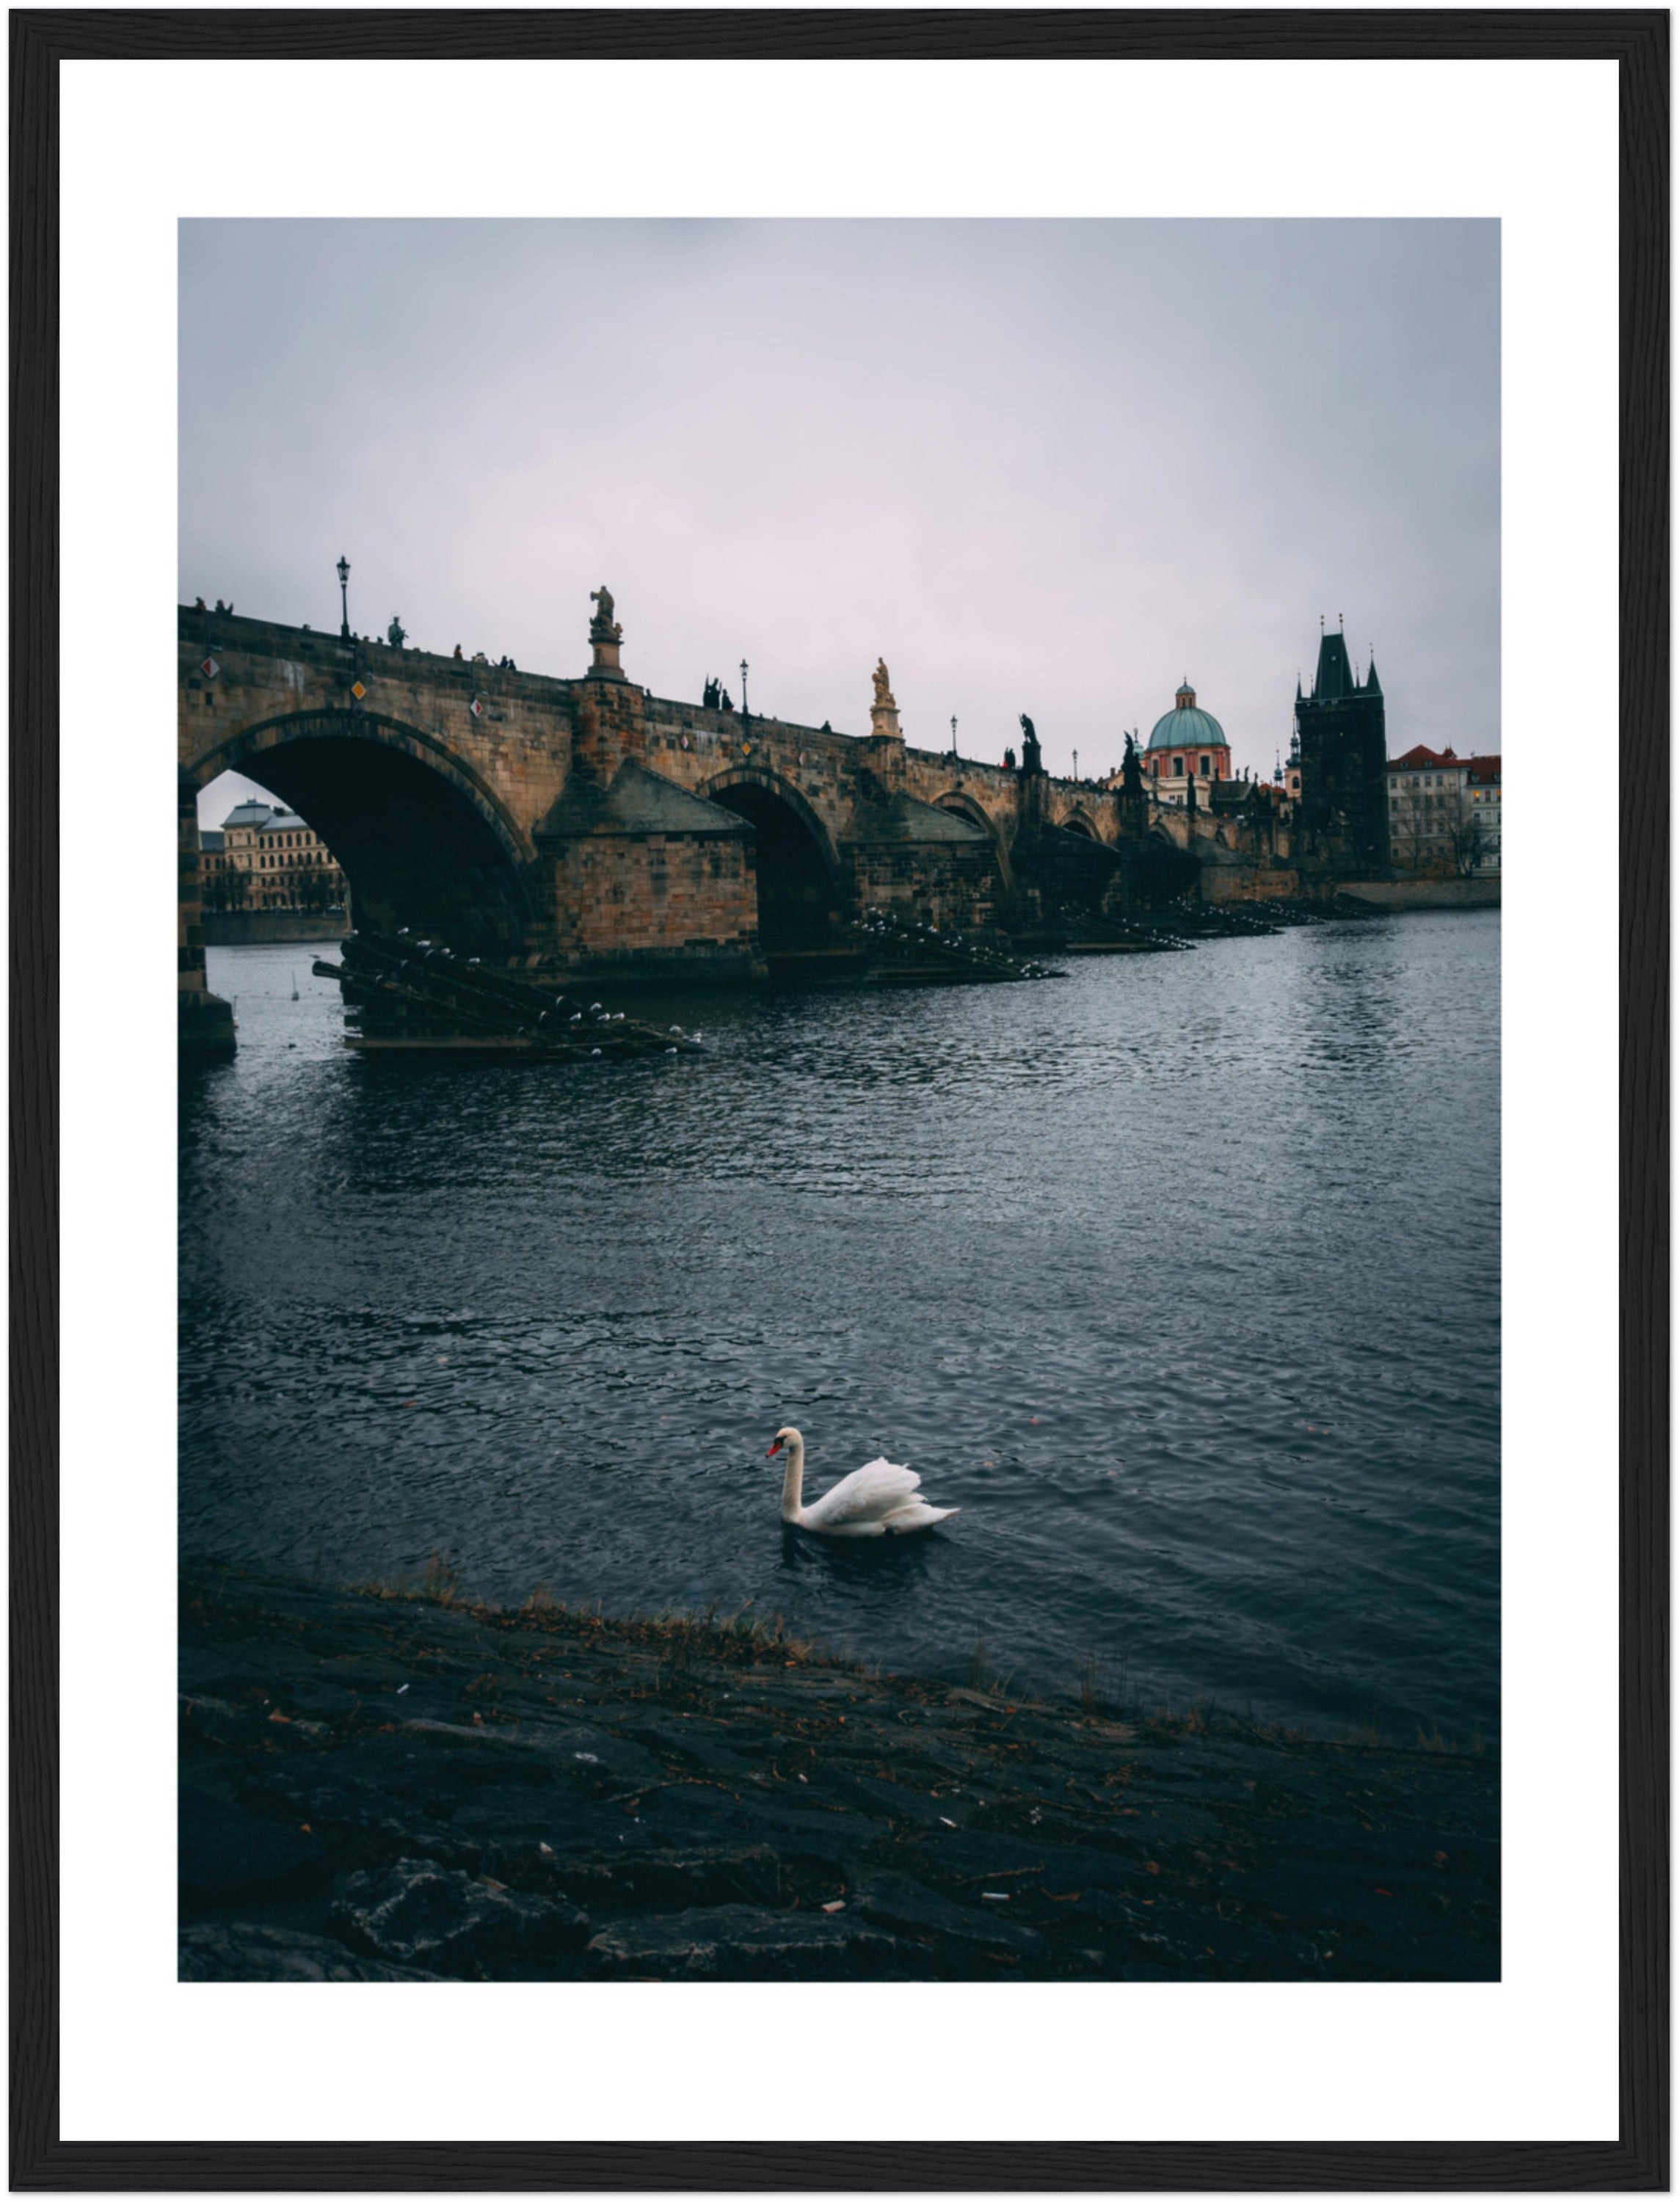 Glide with the Swan: The Majestic Charles Bridge of Prague | Poster